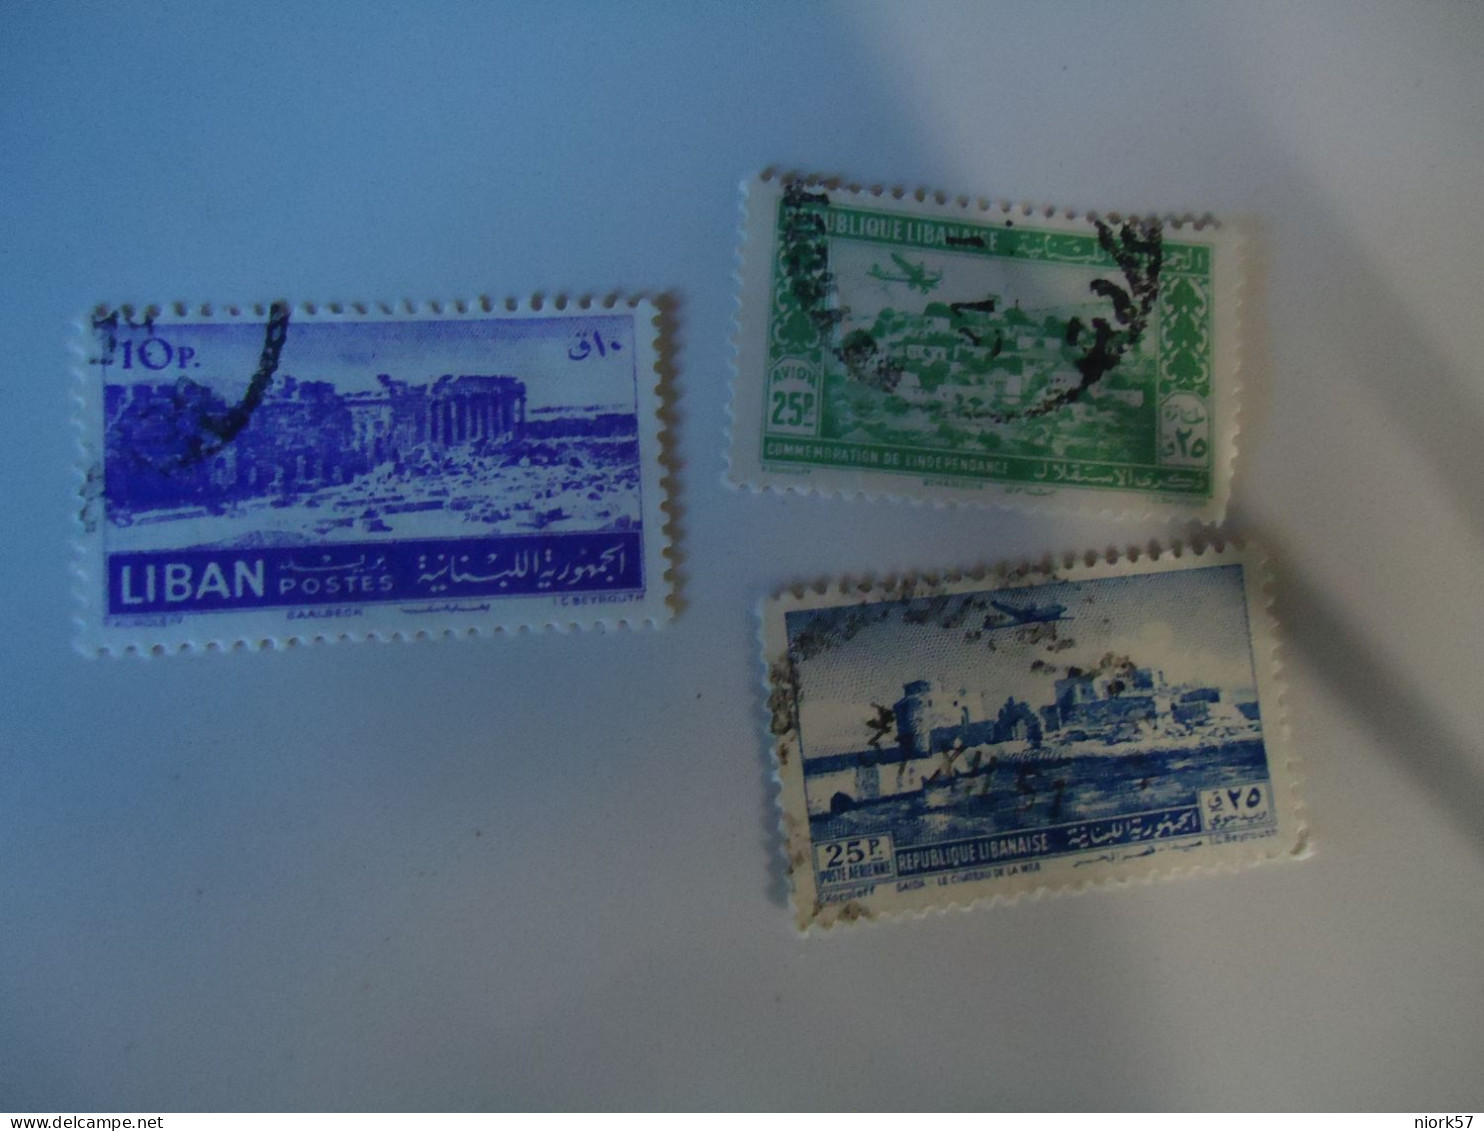 LIBAN  LEBANON USED    3 STAMPS  LANDSCAPES  MONUMENTS AIR - Lebanon